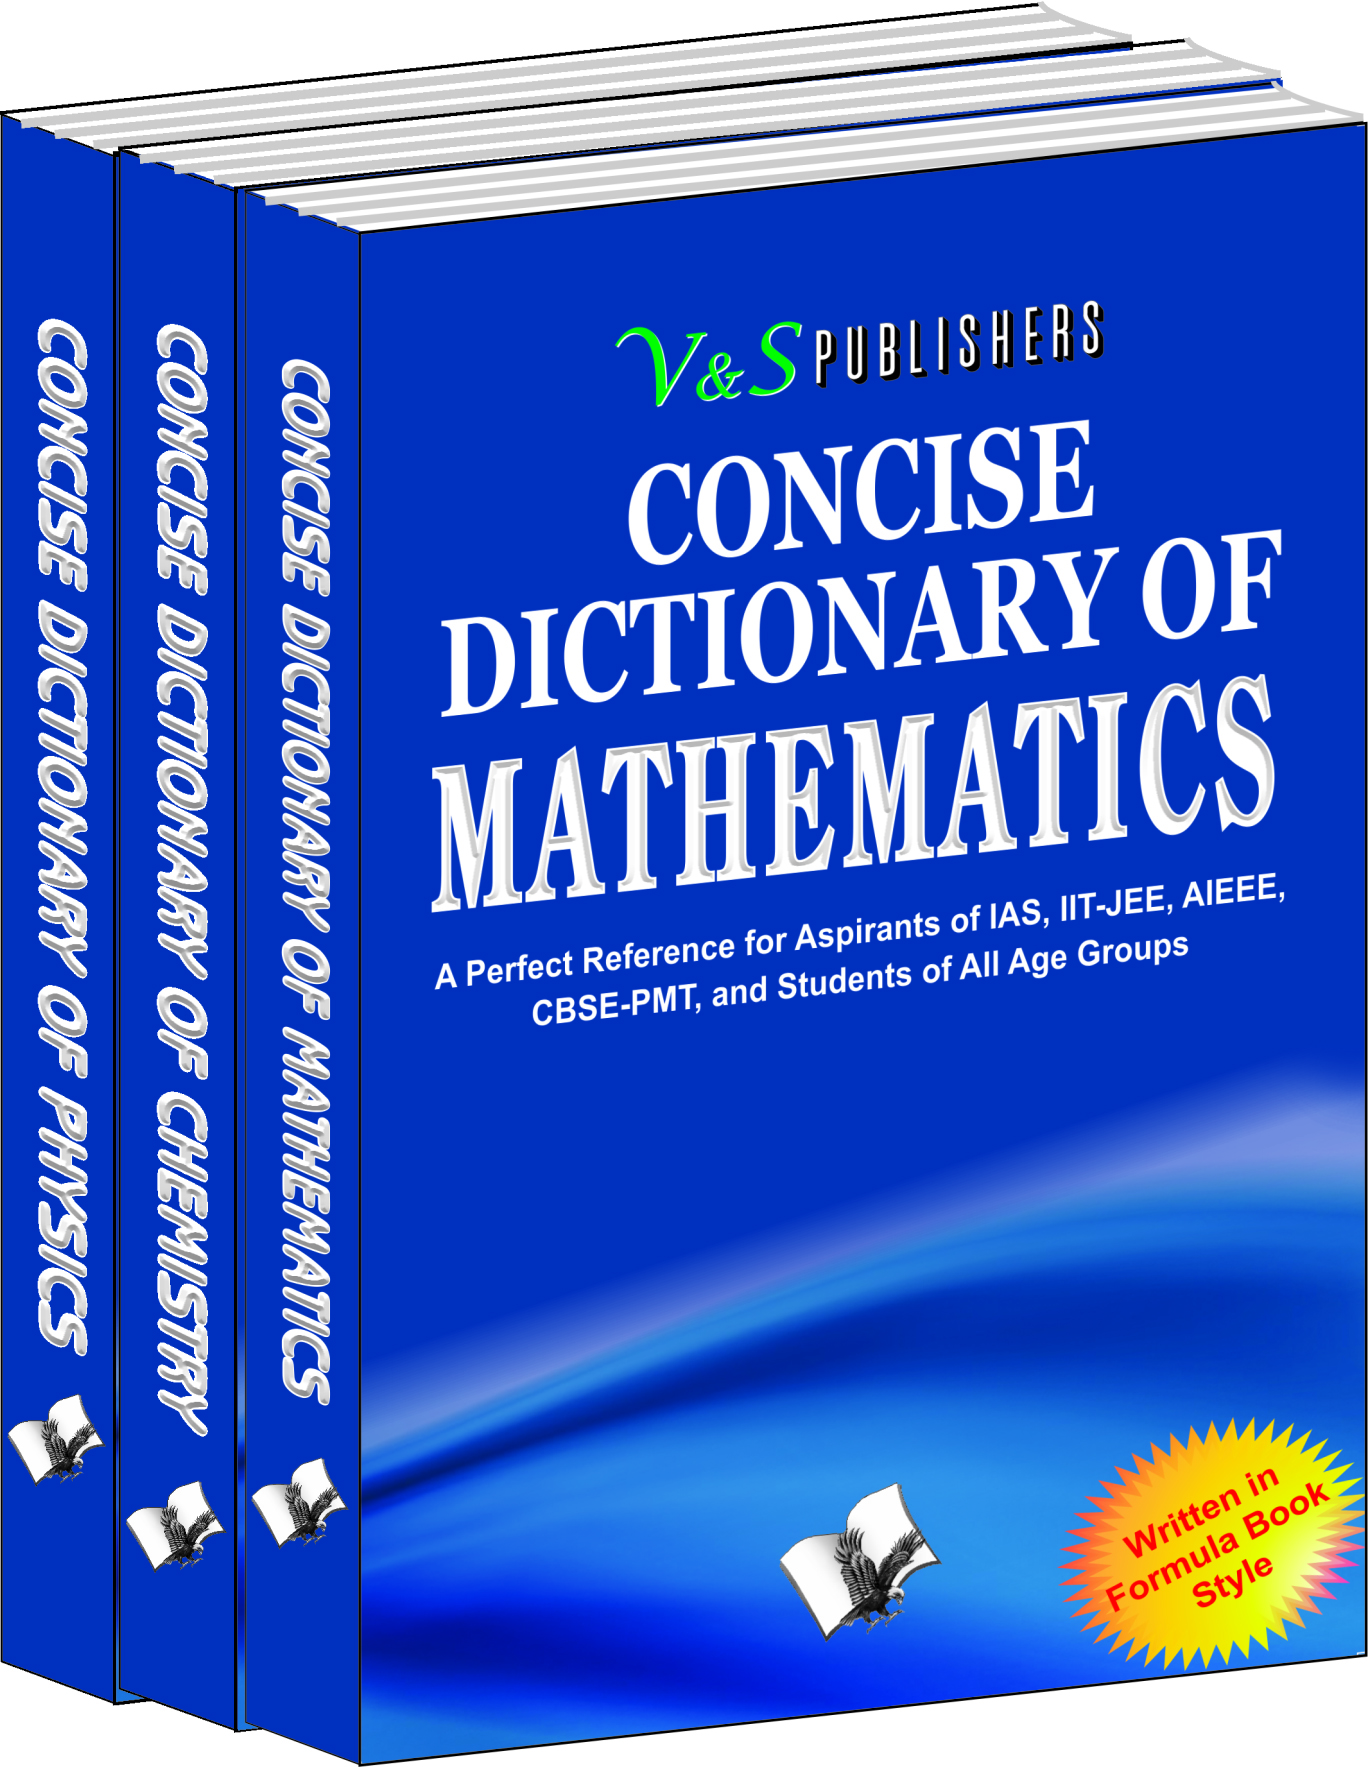 Concise PCM Dictionary Value Pack-Terms used in Physics, Chemistry & Mathematics with simplified meaning for students, job exams & common readers